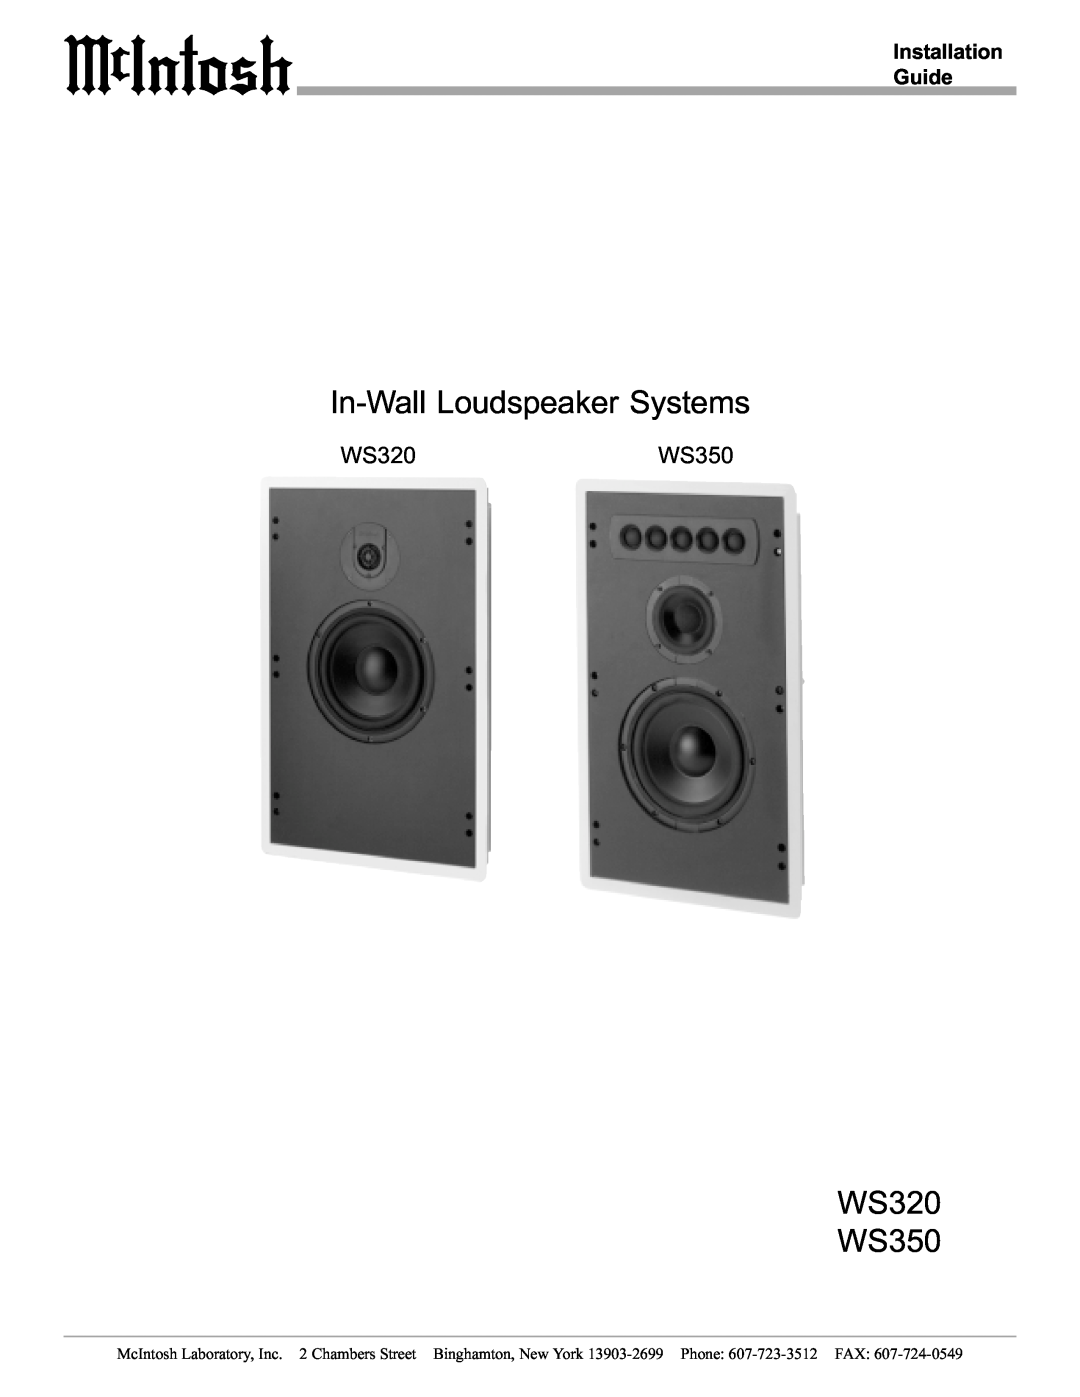 McIntosh manual Installation Guide, In-WallLoudspeaker Systems, WS320 WS350, WS320WS350 